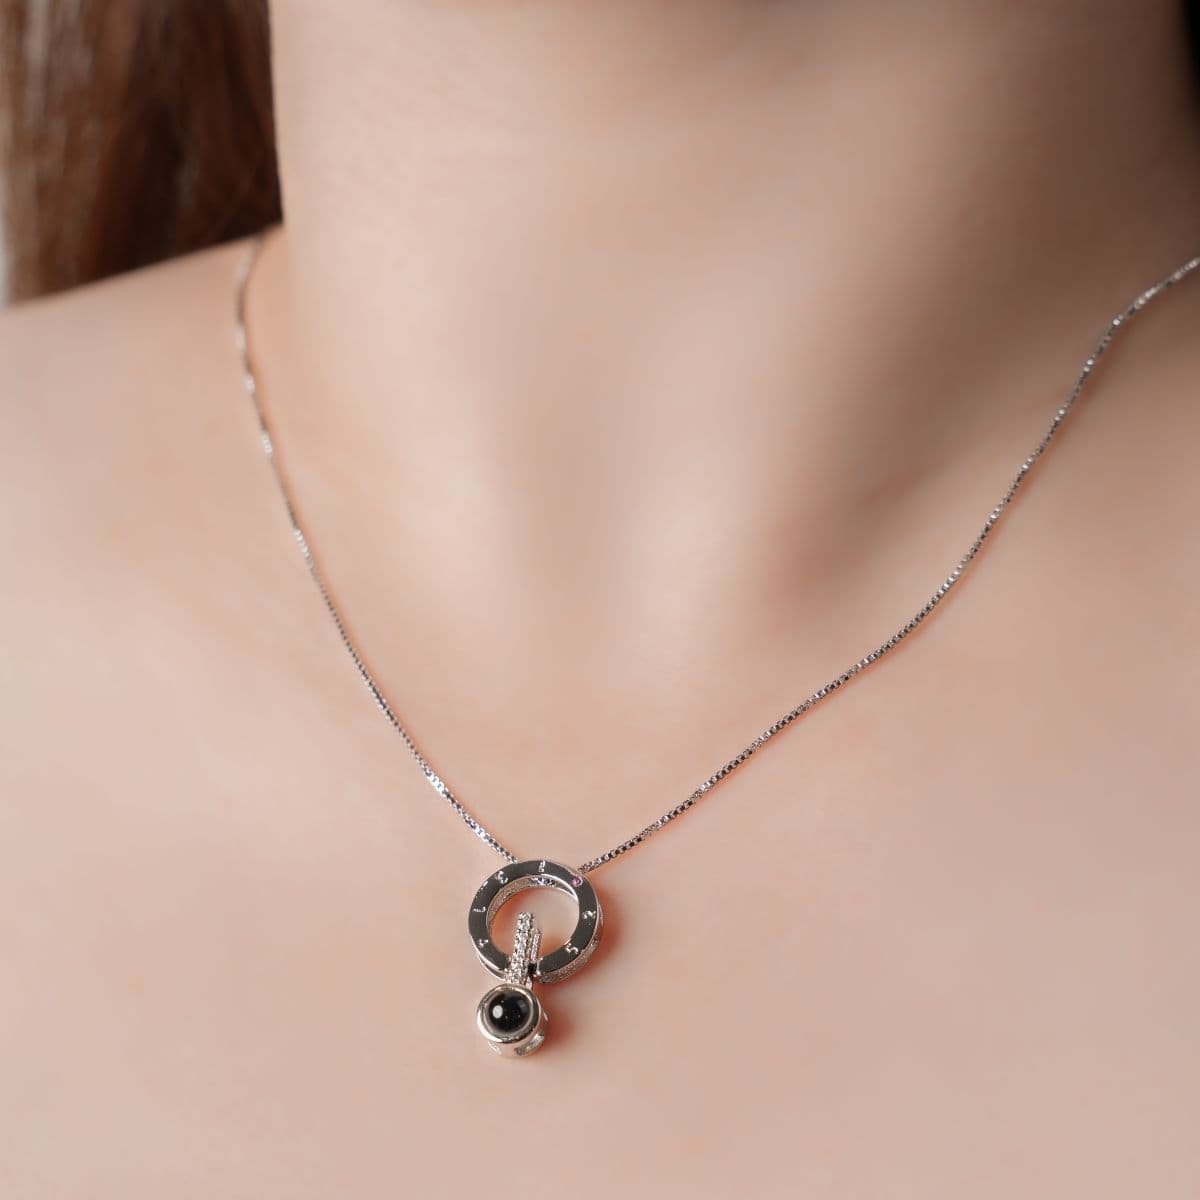 https://m.clubbella.co/product/hundred-love-projected-2-way-necklace/ DSC01768-12